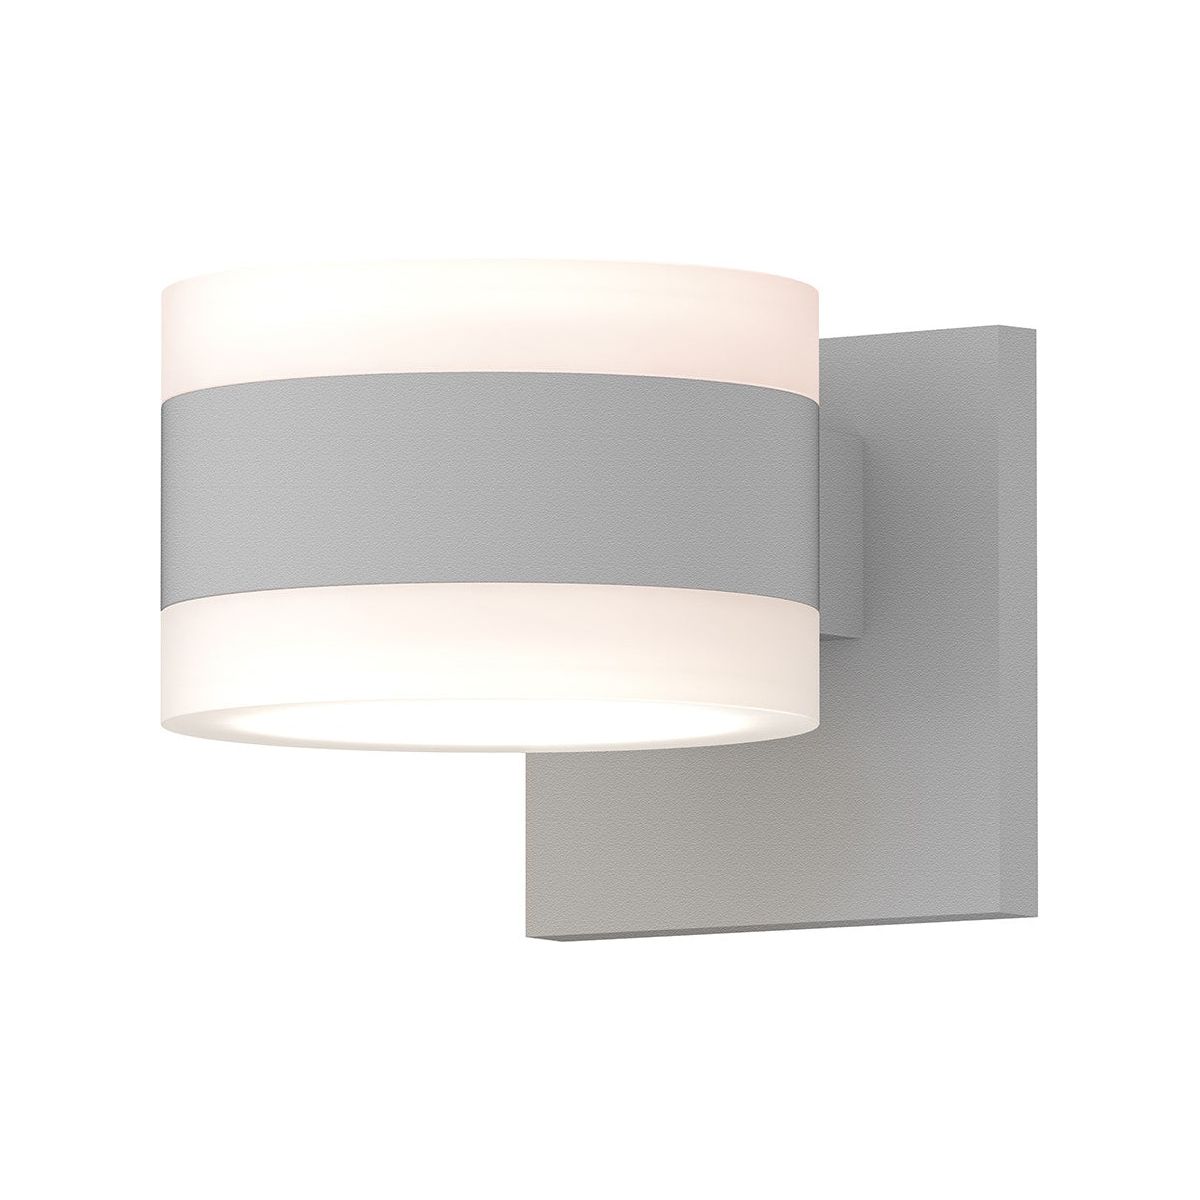 REALS Up/Down LED Sconce with Cylinder Lenses